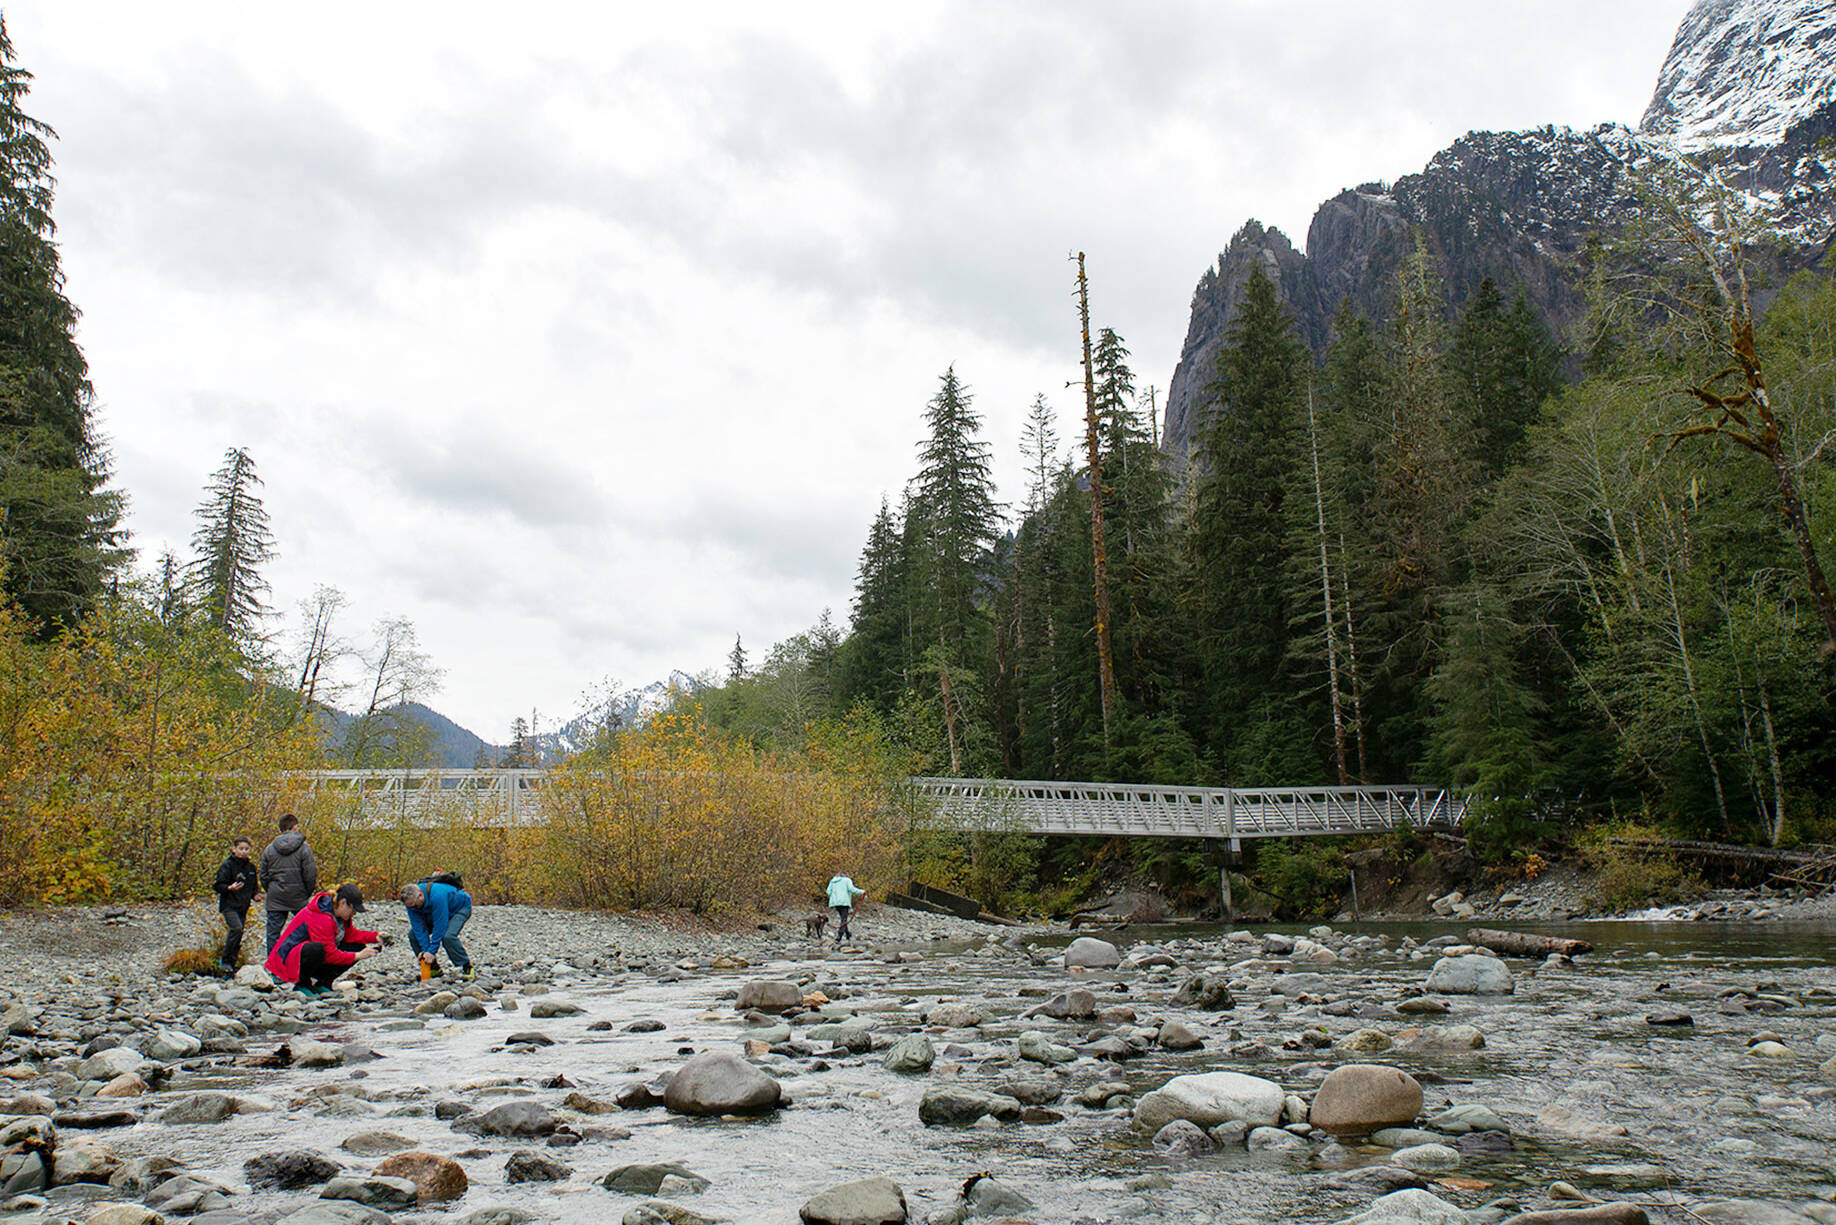 People explore along the South Fork Stillaguamish River near the repaired bridge that heads to Big Four Ice Caves on Oct. 28, in Mount Baker-Snoqualmie National Forest near Granite Falls. Ryan Berry / Everett Herald photo